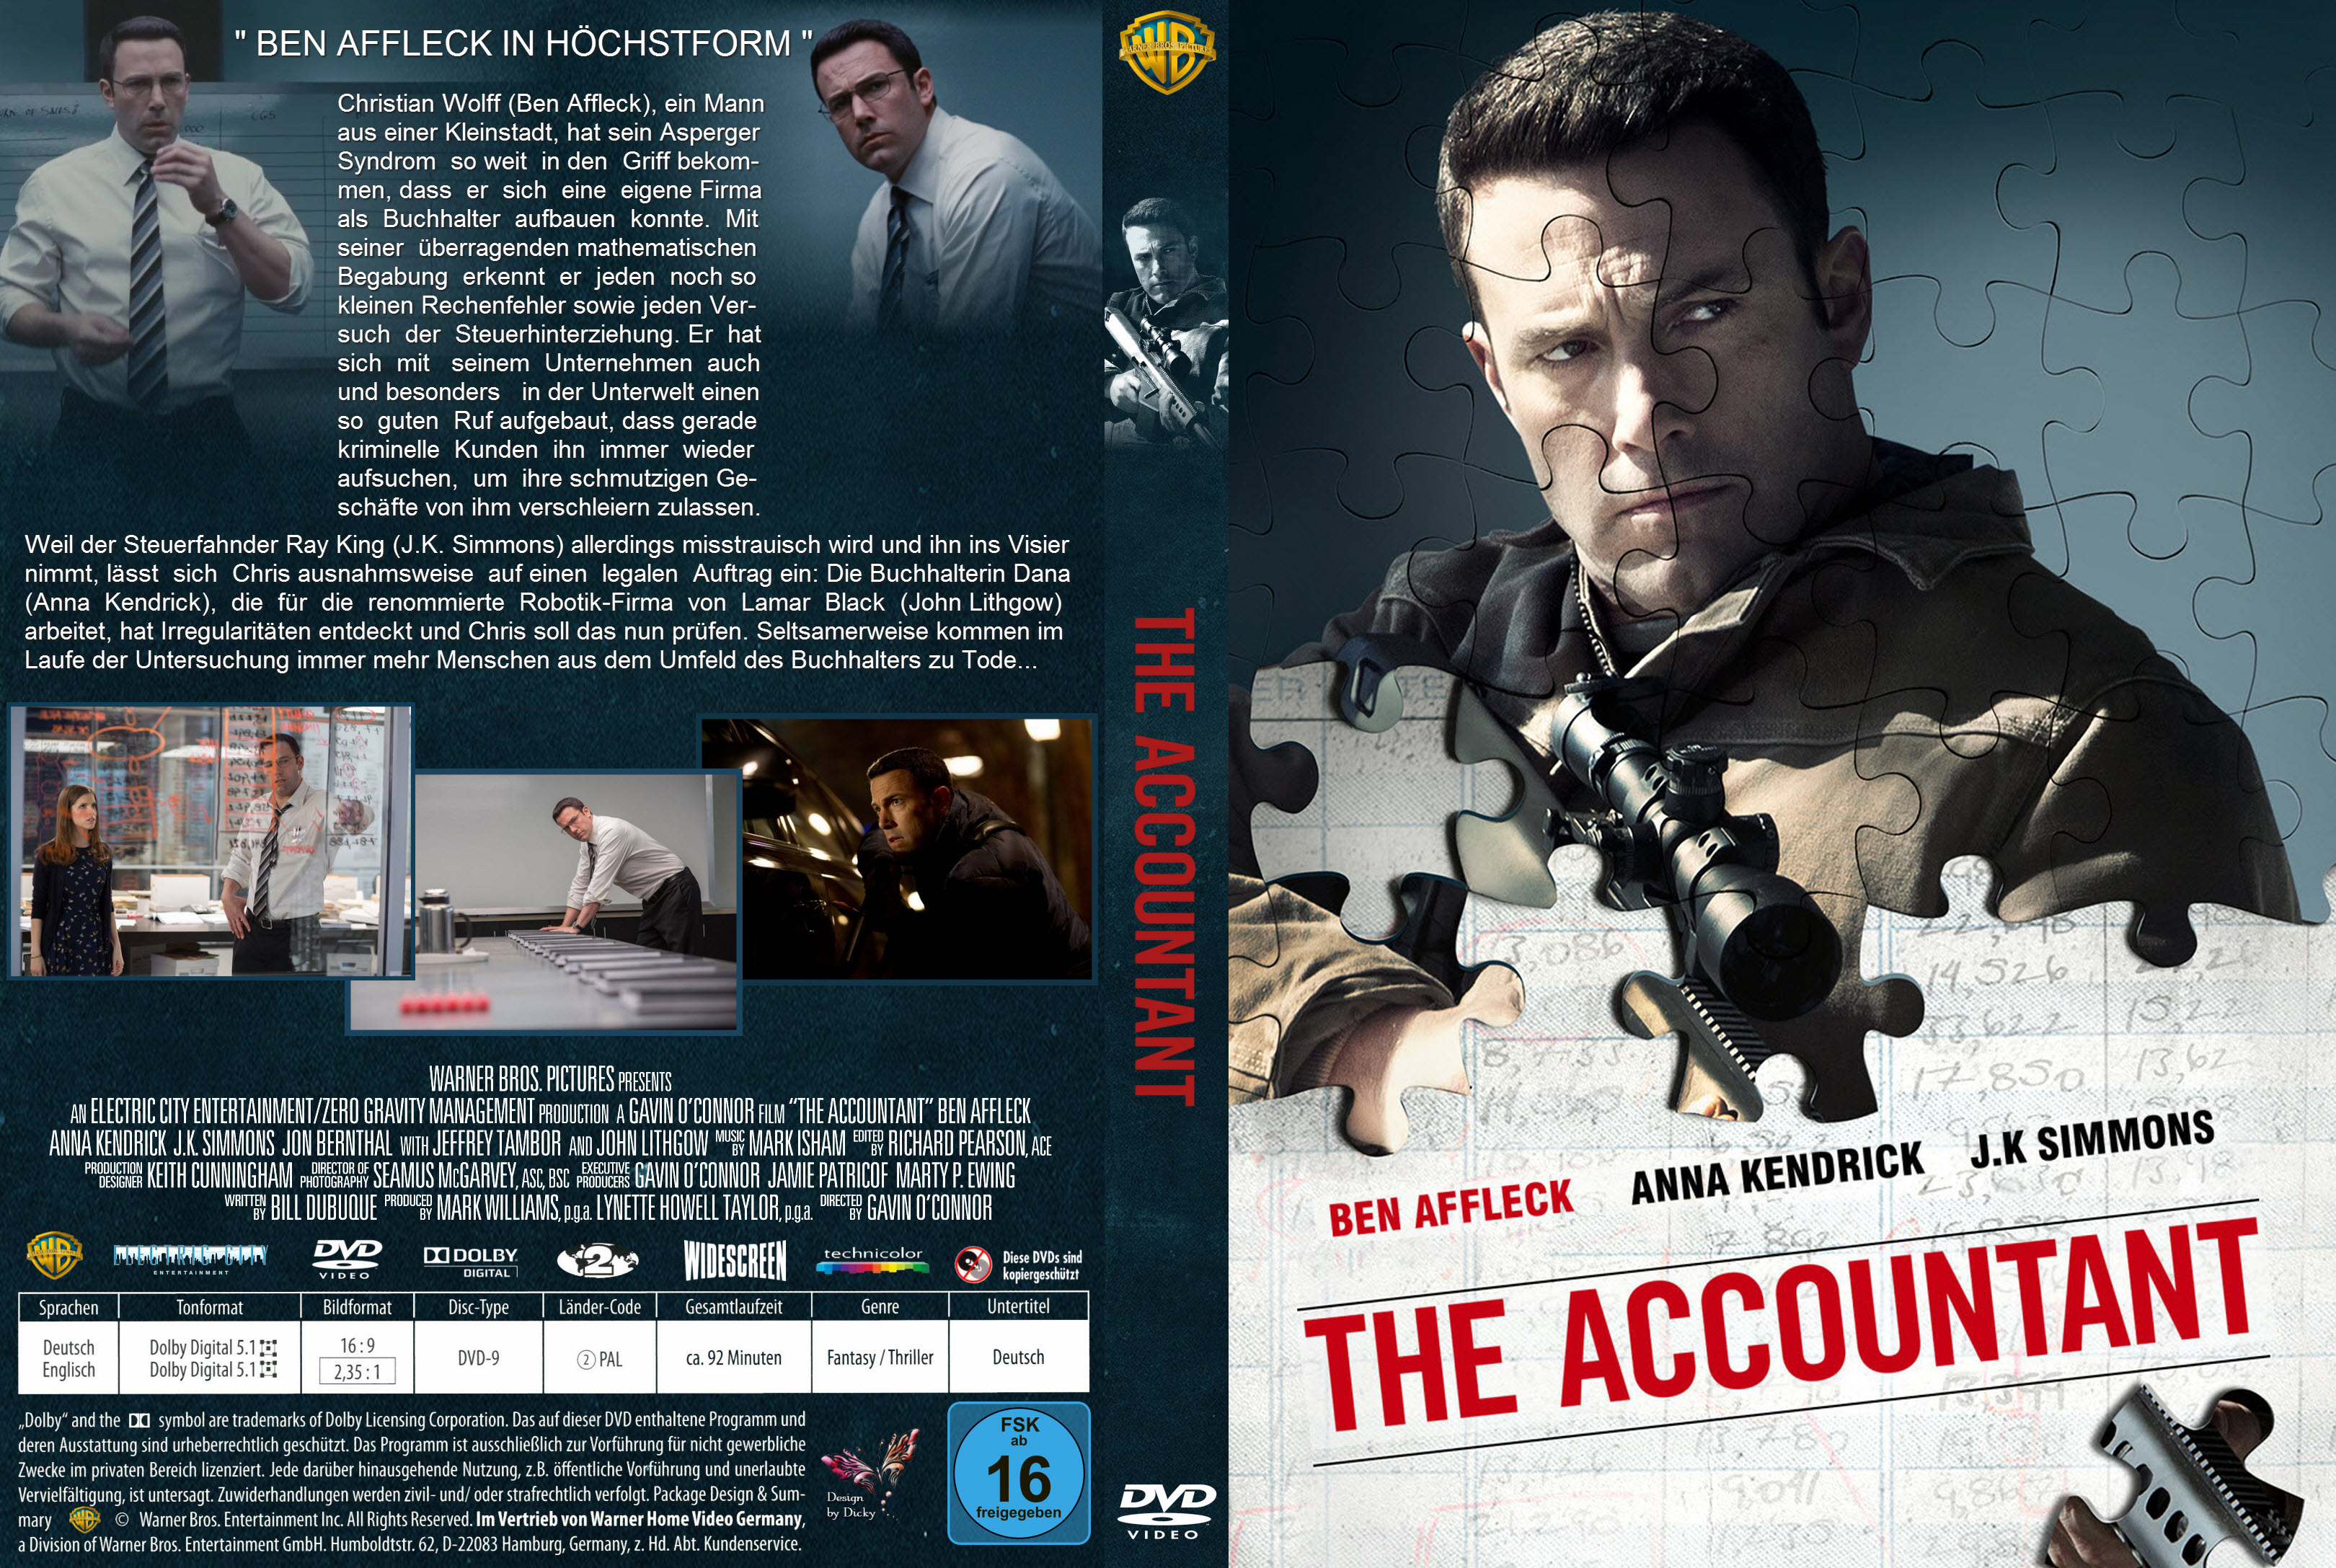 The Accountant | German DVD Covers